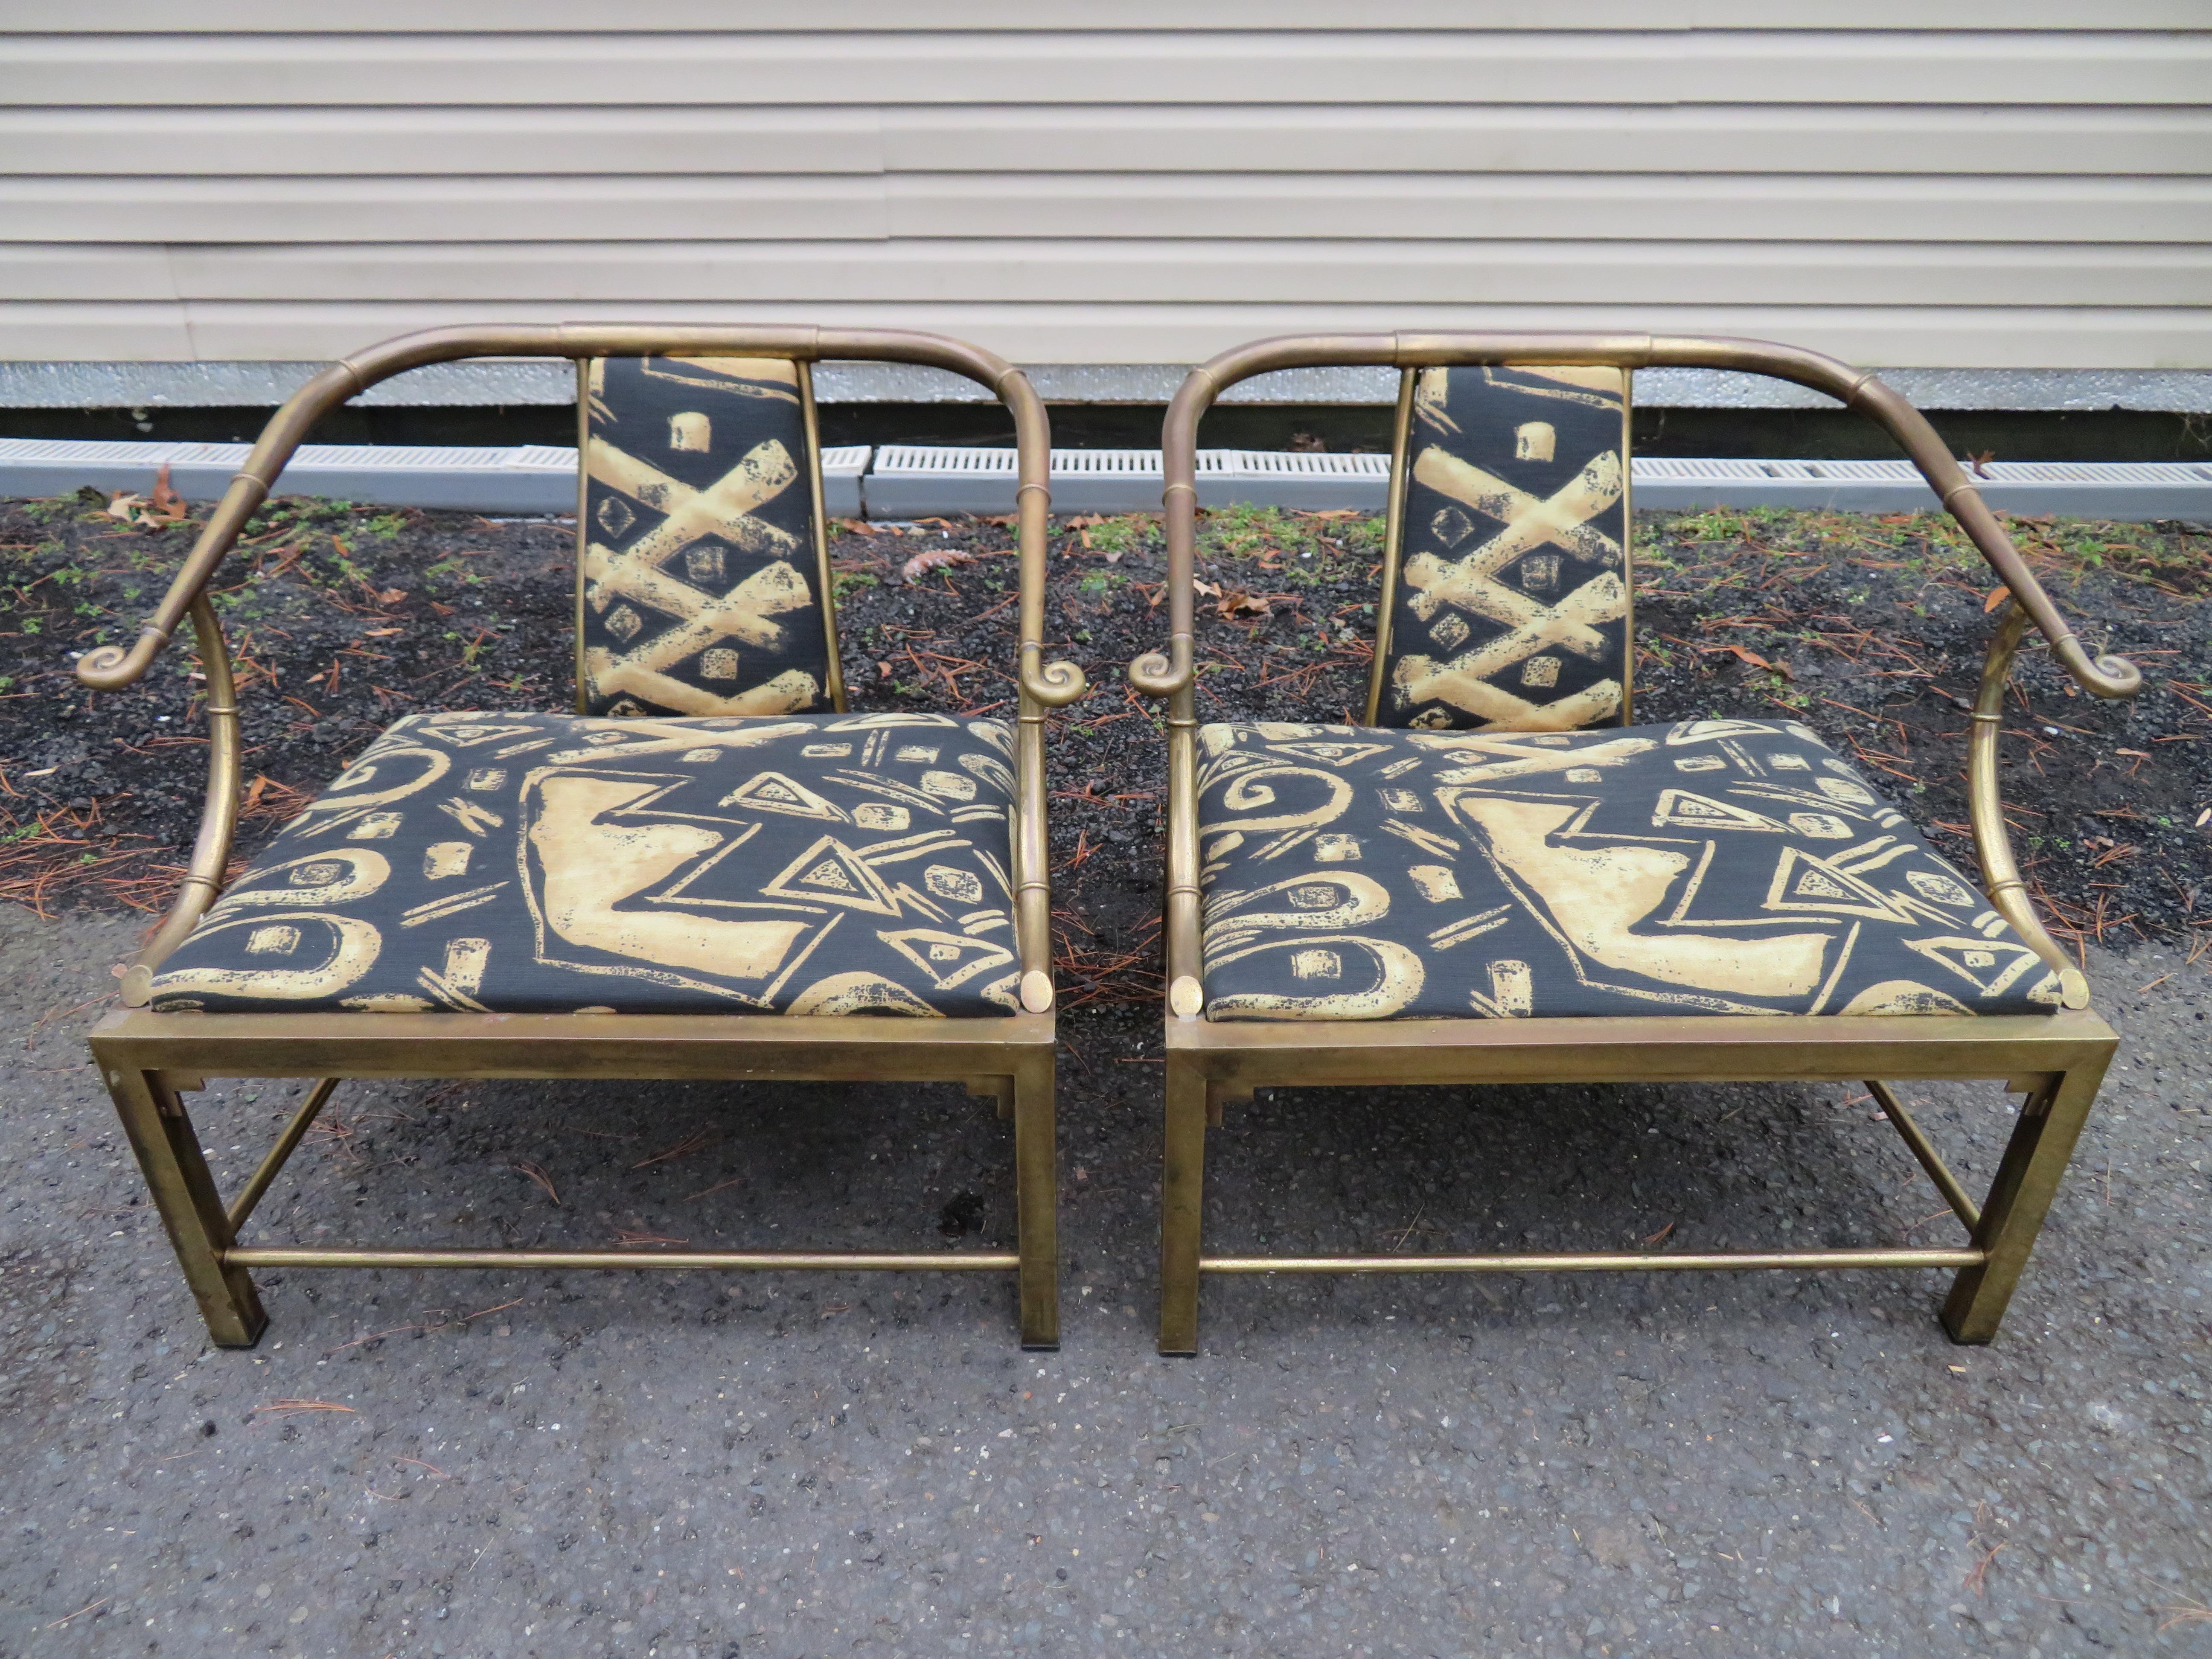 Fabulous pair of Mastercraft brass Asian style horseshoe back lounge chairs. These pair are quite unusual and different from all the other Mastercraft Asian style lounge chairs on 1stdibs or anywhere really. They seem to be a bit heavier and have a